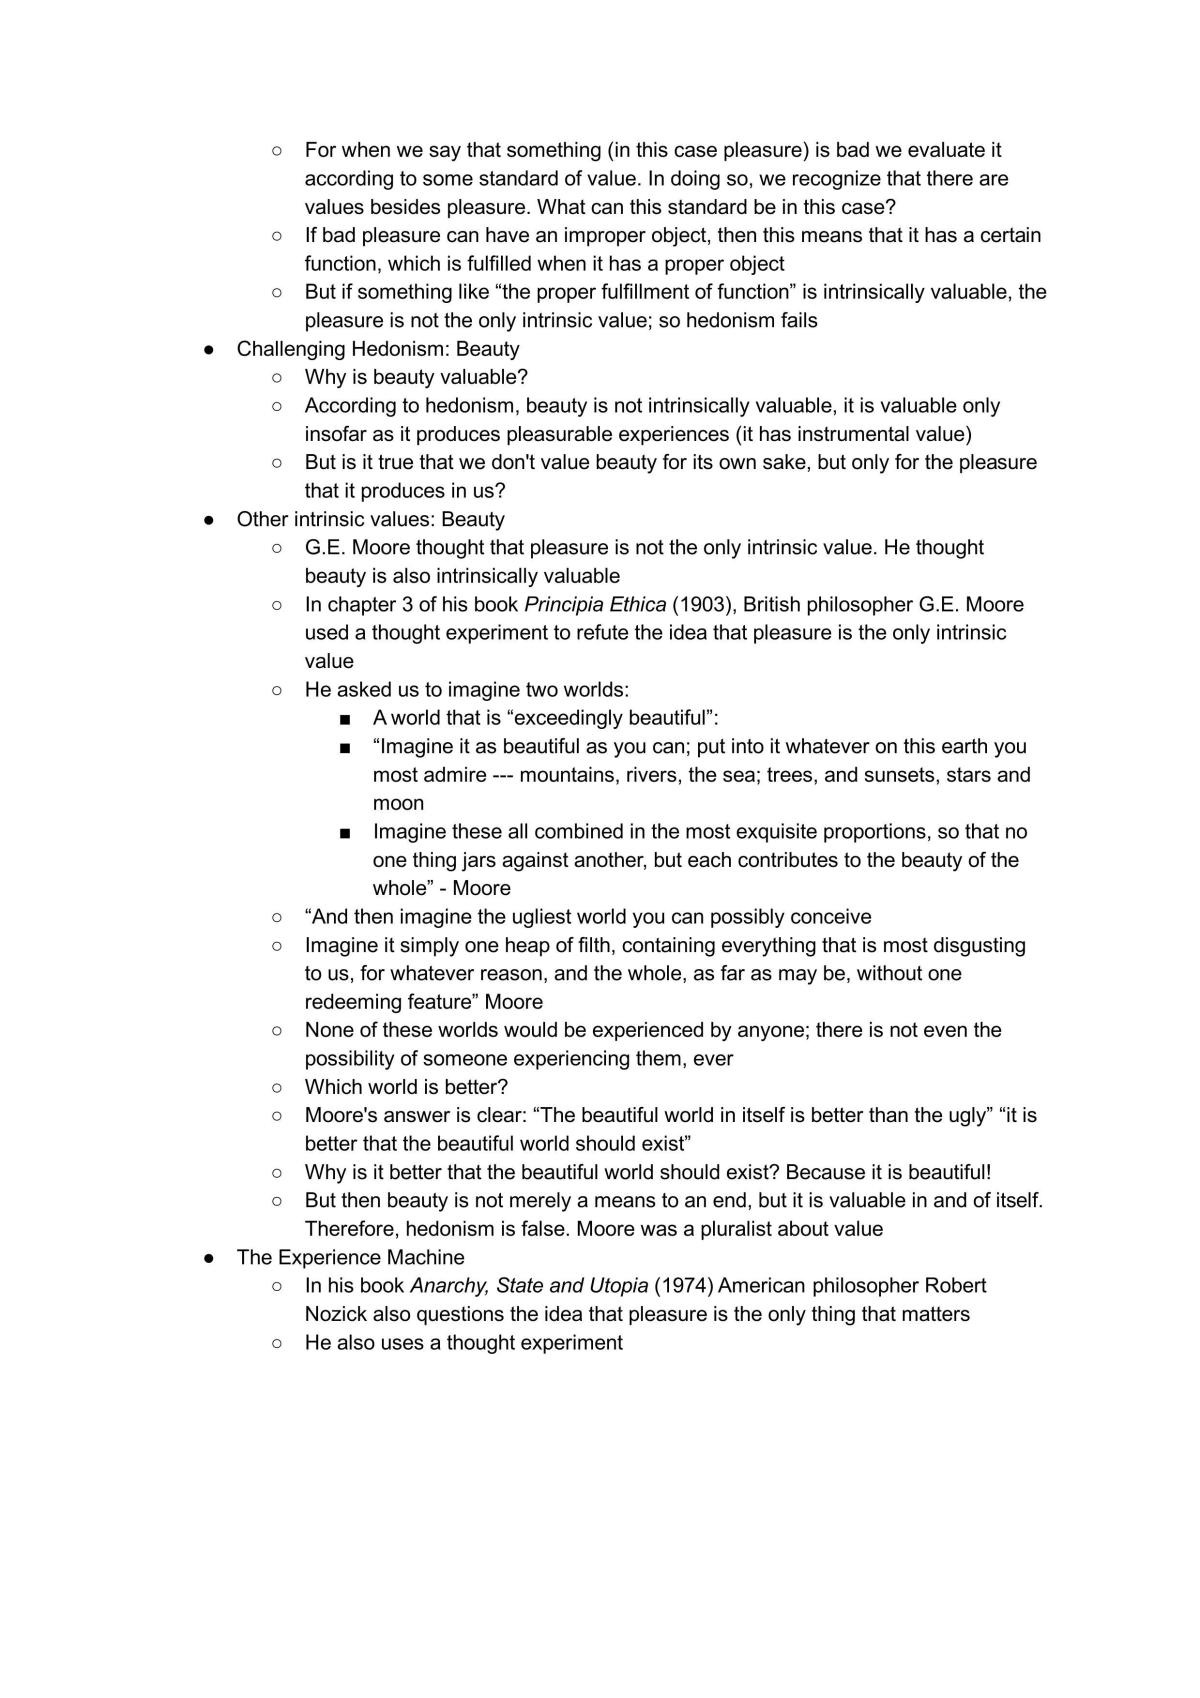 The Meaning of Life Study Notes - Page 22